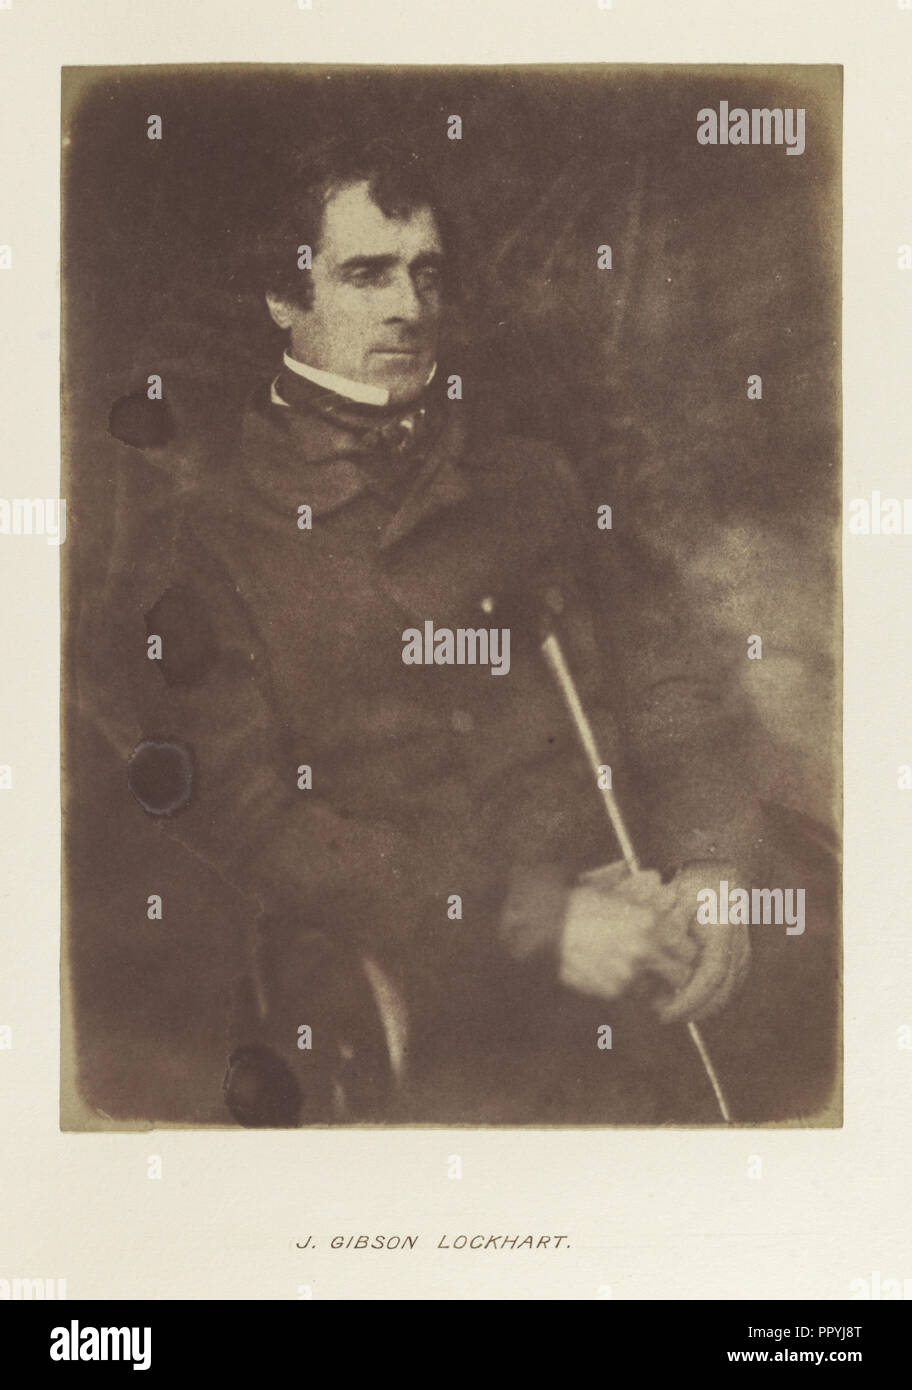 J. Gibson Lockhart; Hill & Adamson, Scottish, active 1843 - 1848, Scotland; 1843 - 1848; Salted paper print from a Calotype Stock Photo